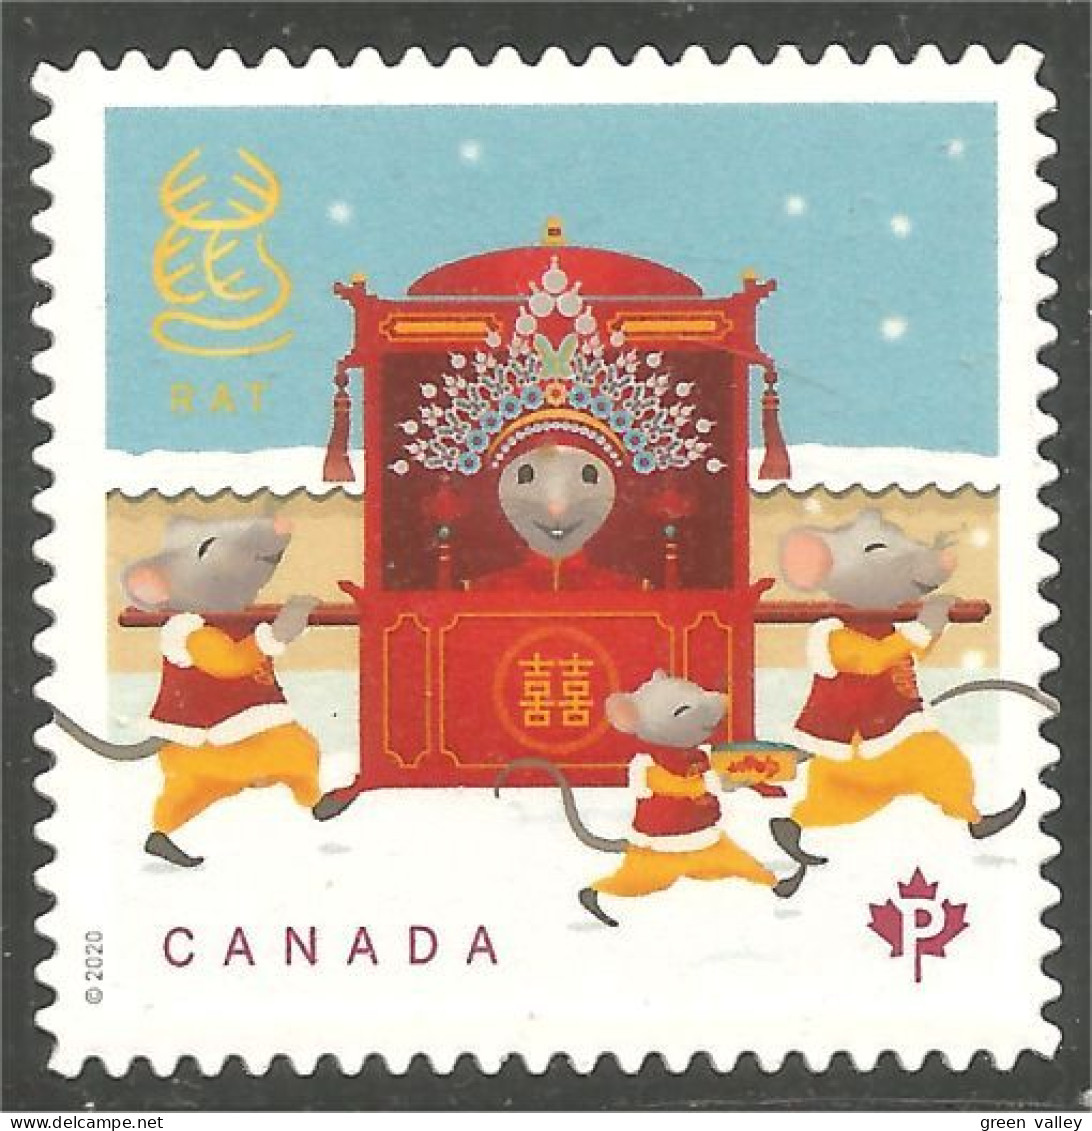 Canada Année New Year Rat Annual Collection Annuelle MNH ** Neuf SC (C32-31iia) - Nuevos